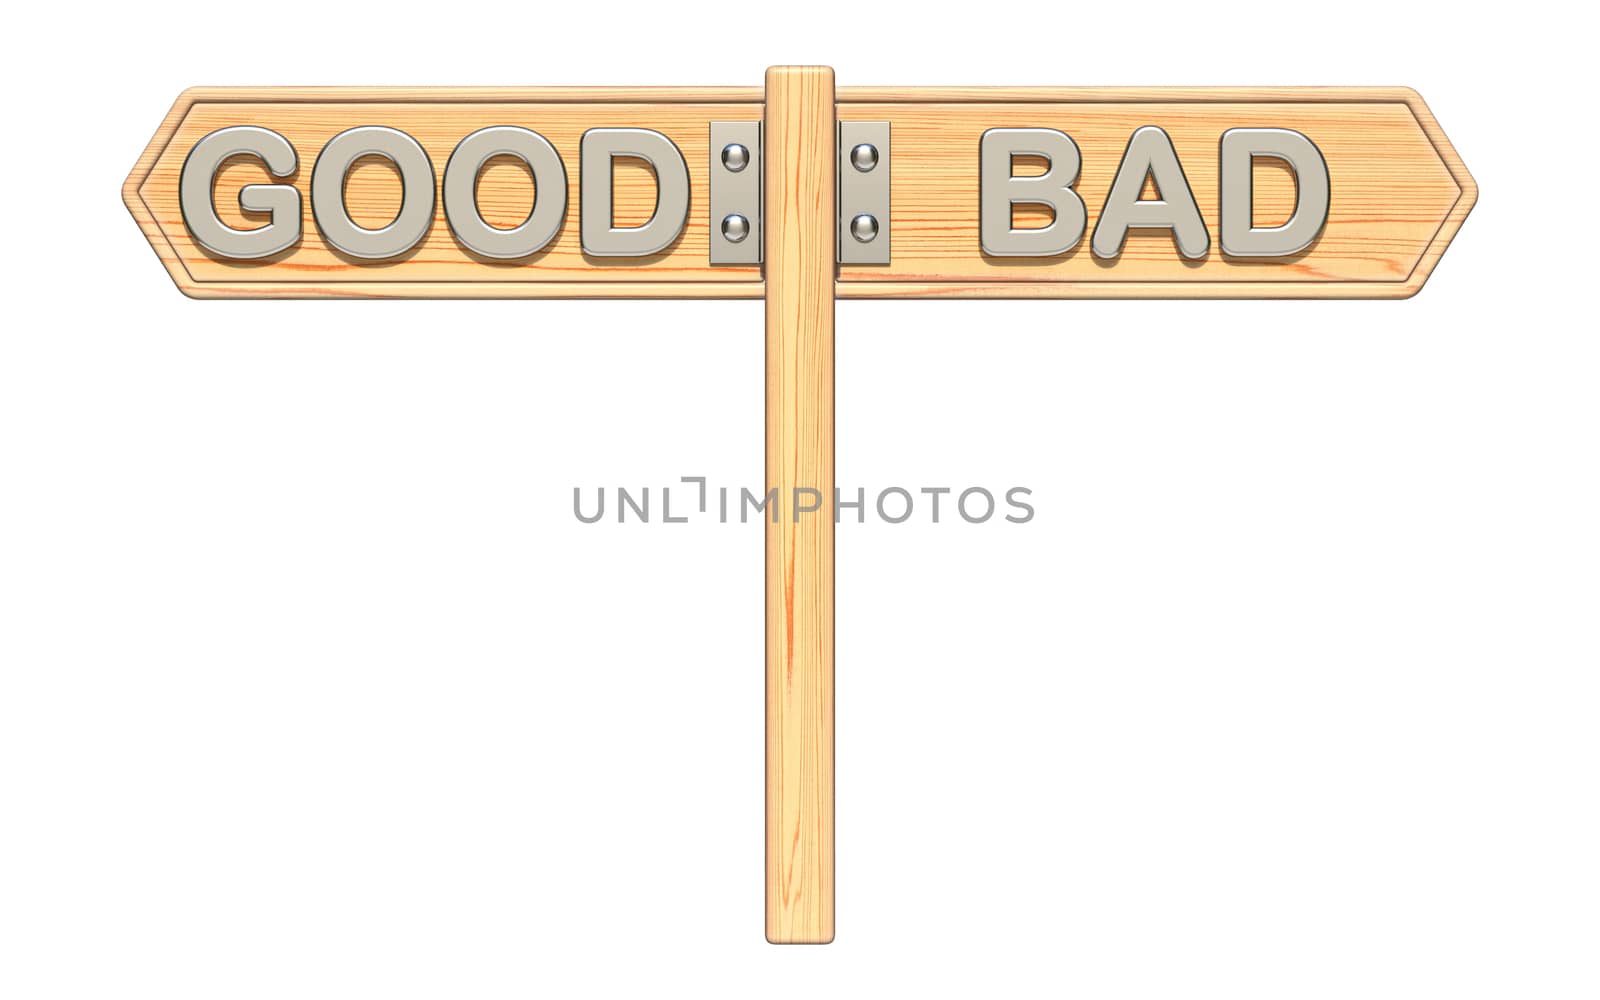 GOOD and BAD wooden sign 3D render illustration isolated on white background